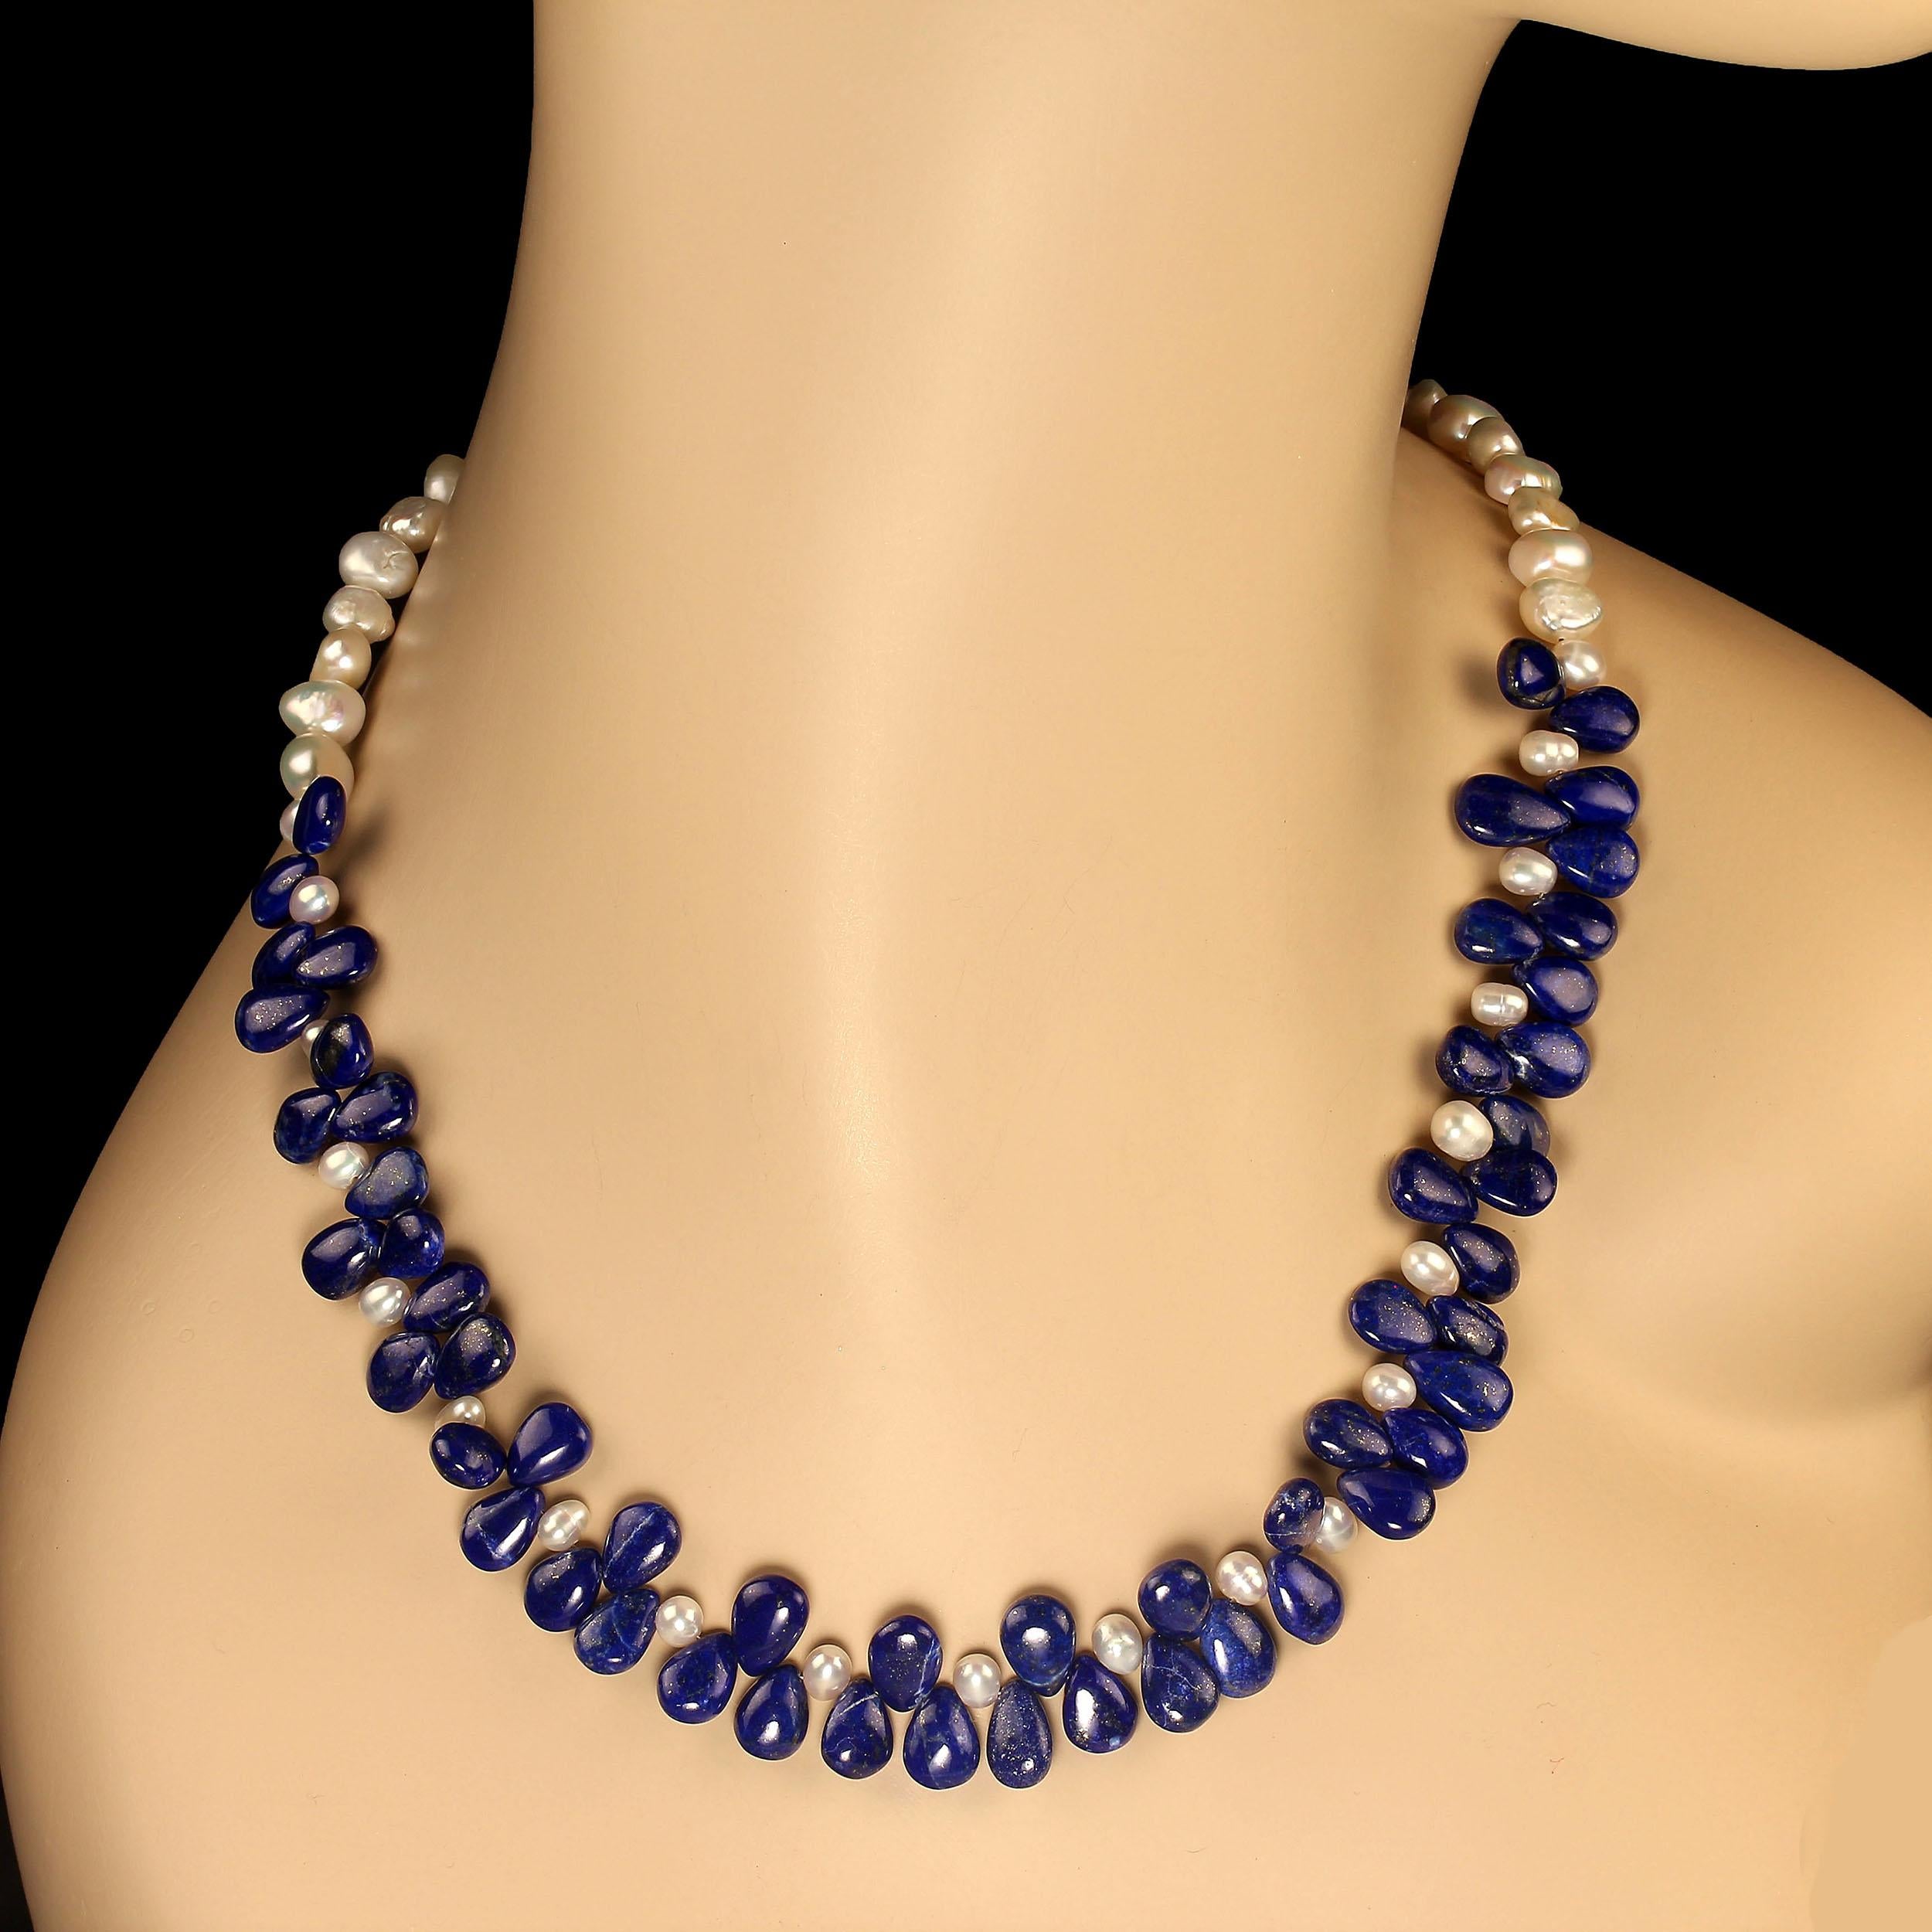 20-inch one-of-a-kind necklace of lapis lazuli smooth 9x7 highly polished gemstones accented with creamy white 5mm pearls and double shine 9x7 pearls. This 20-inch necklace is secured with a gold antiqued pewter toggle clasp. MN2403